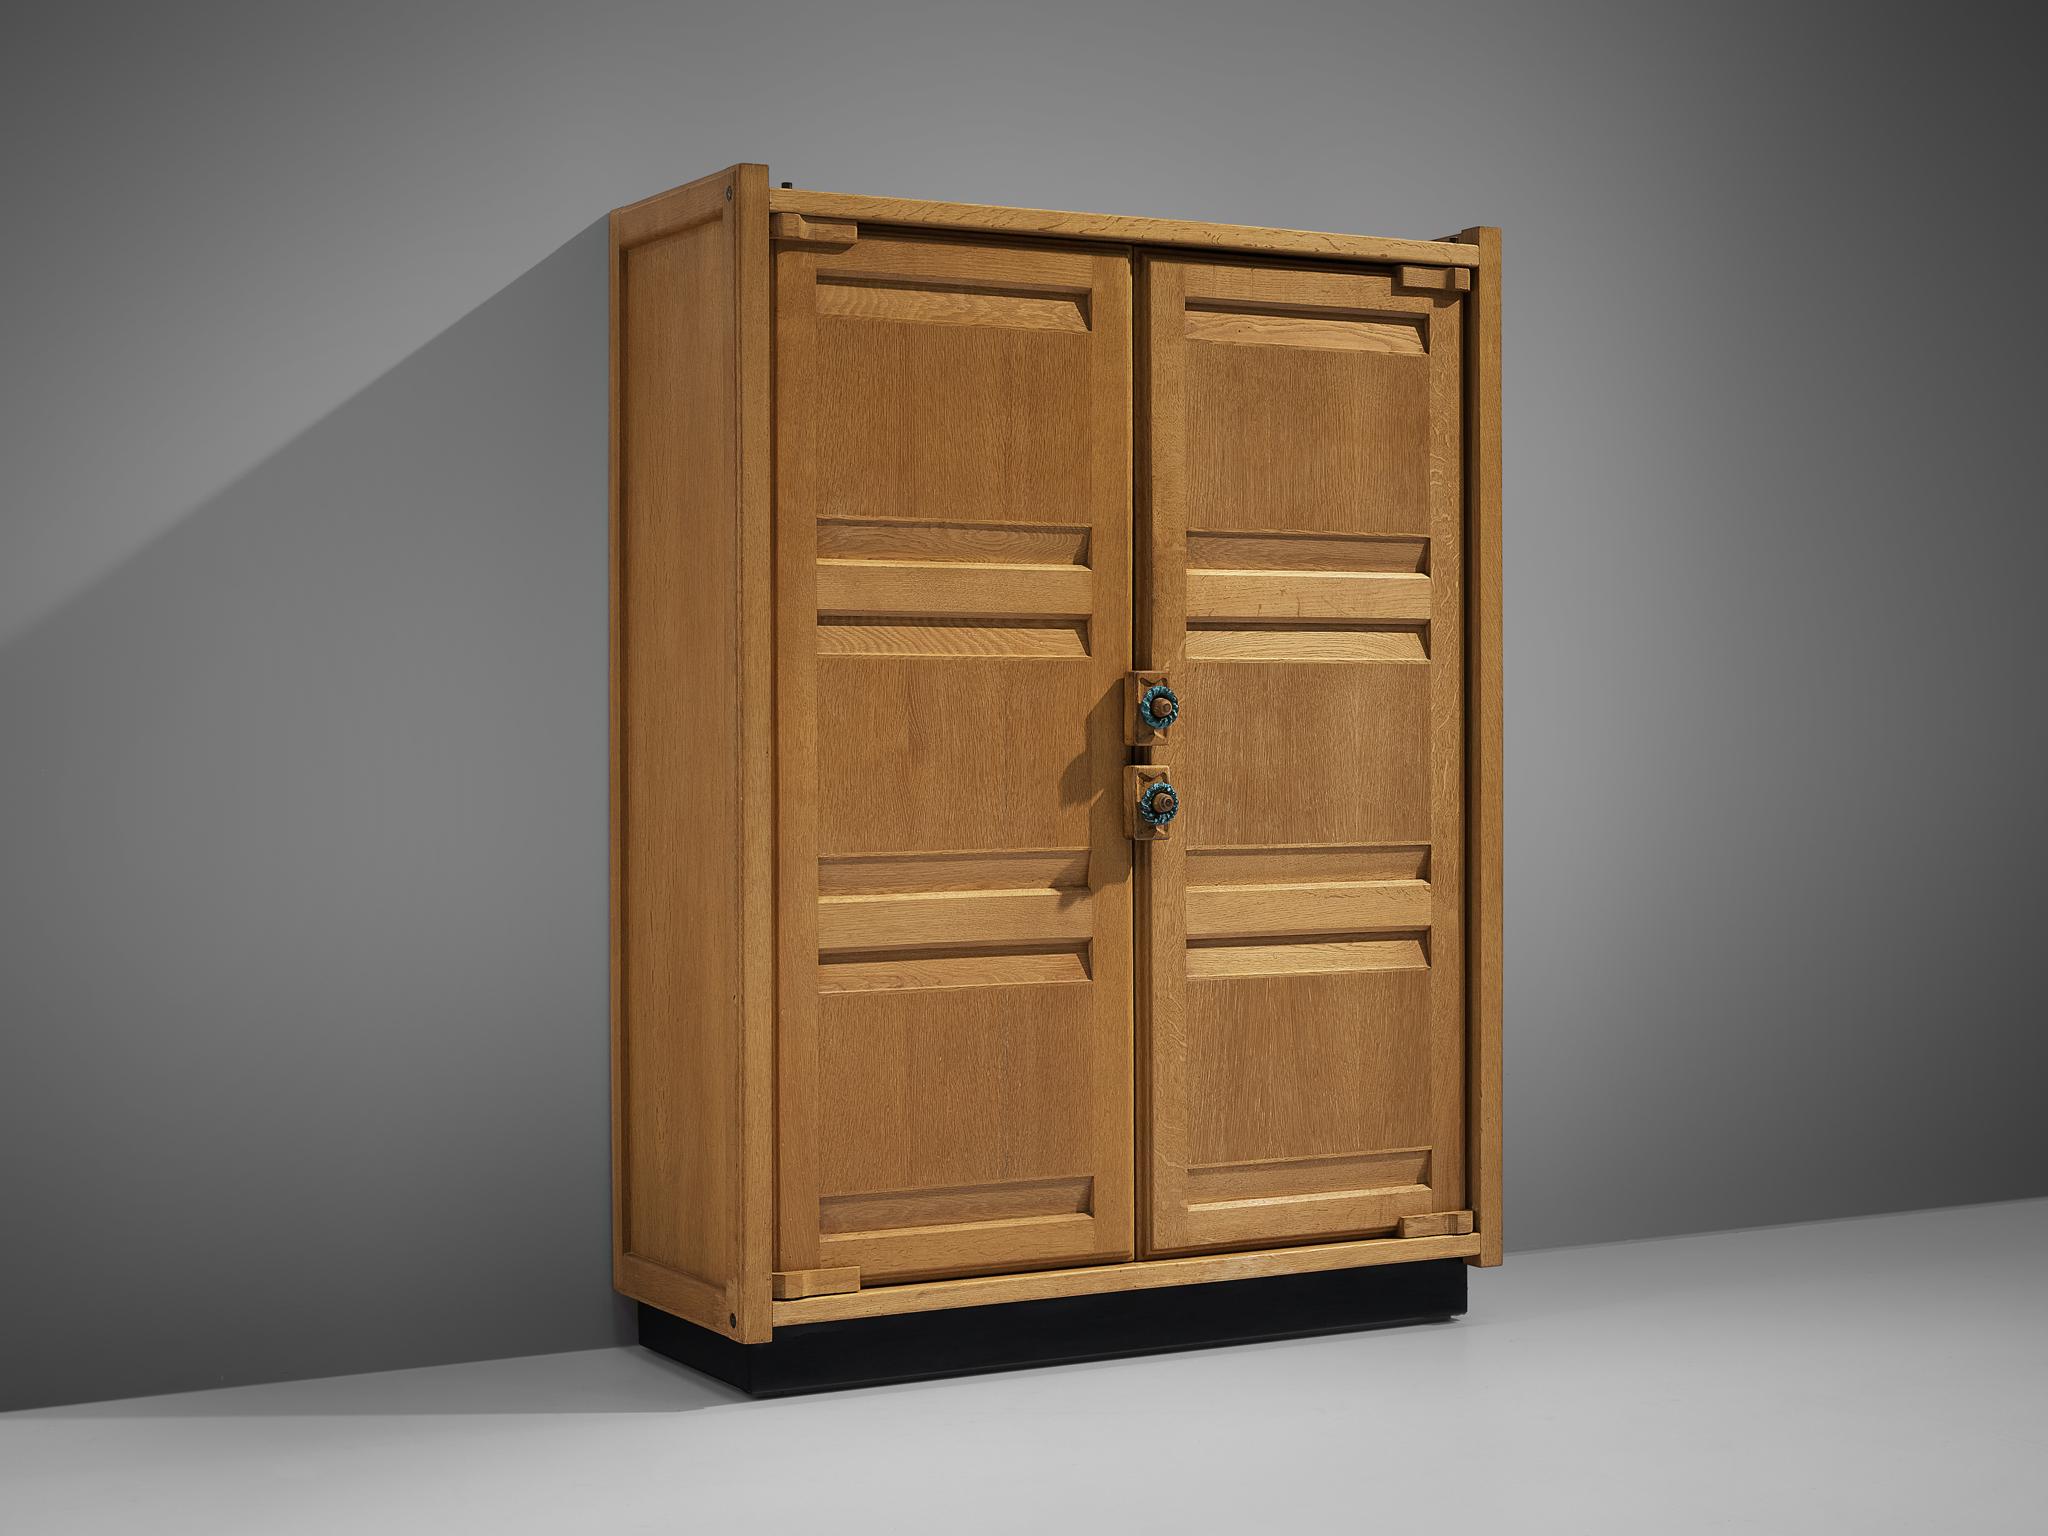 Guillerme et Chambron, armoire, oak, France, 1960s.

This case piece is designed by Guillerme and Chambron and features horizontal panels on the front. The armoire is equipped with colorful, ceramic handles. The cabinet features distinct sculptural